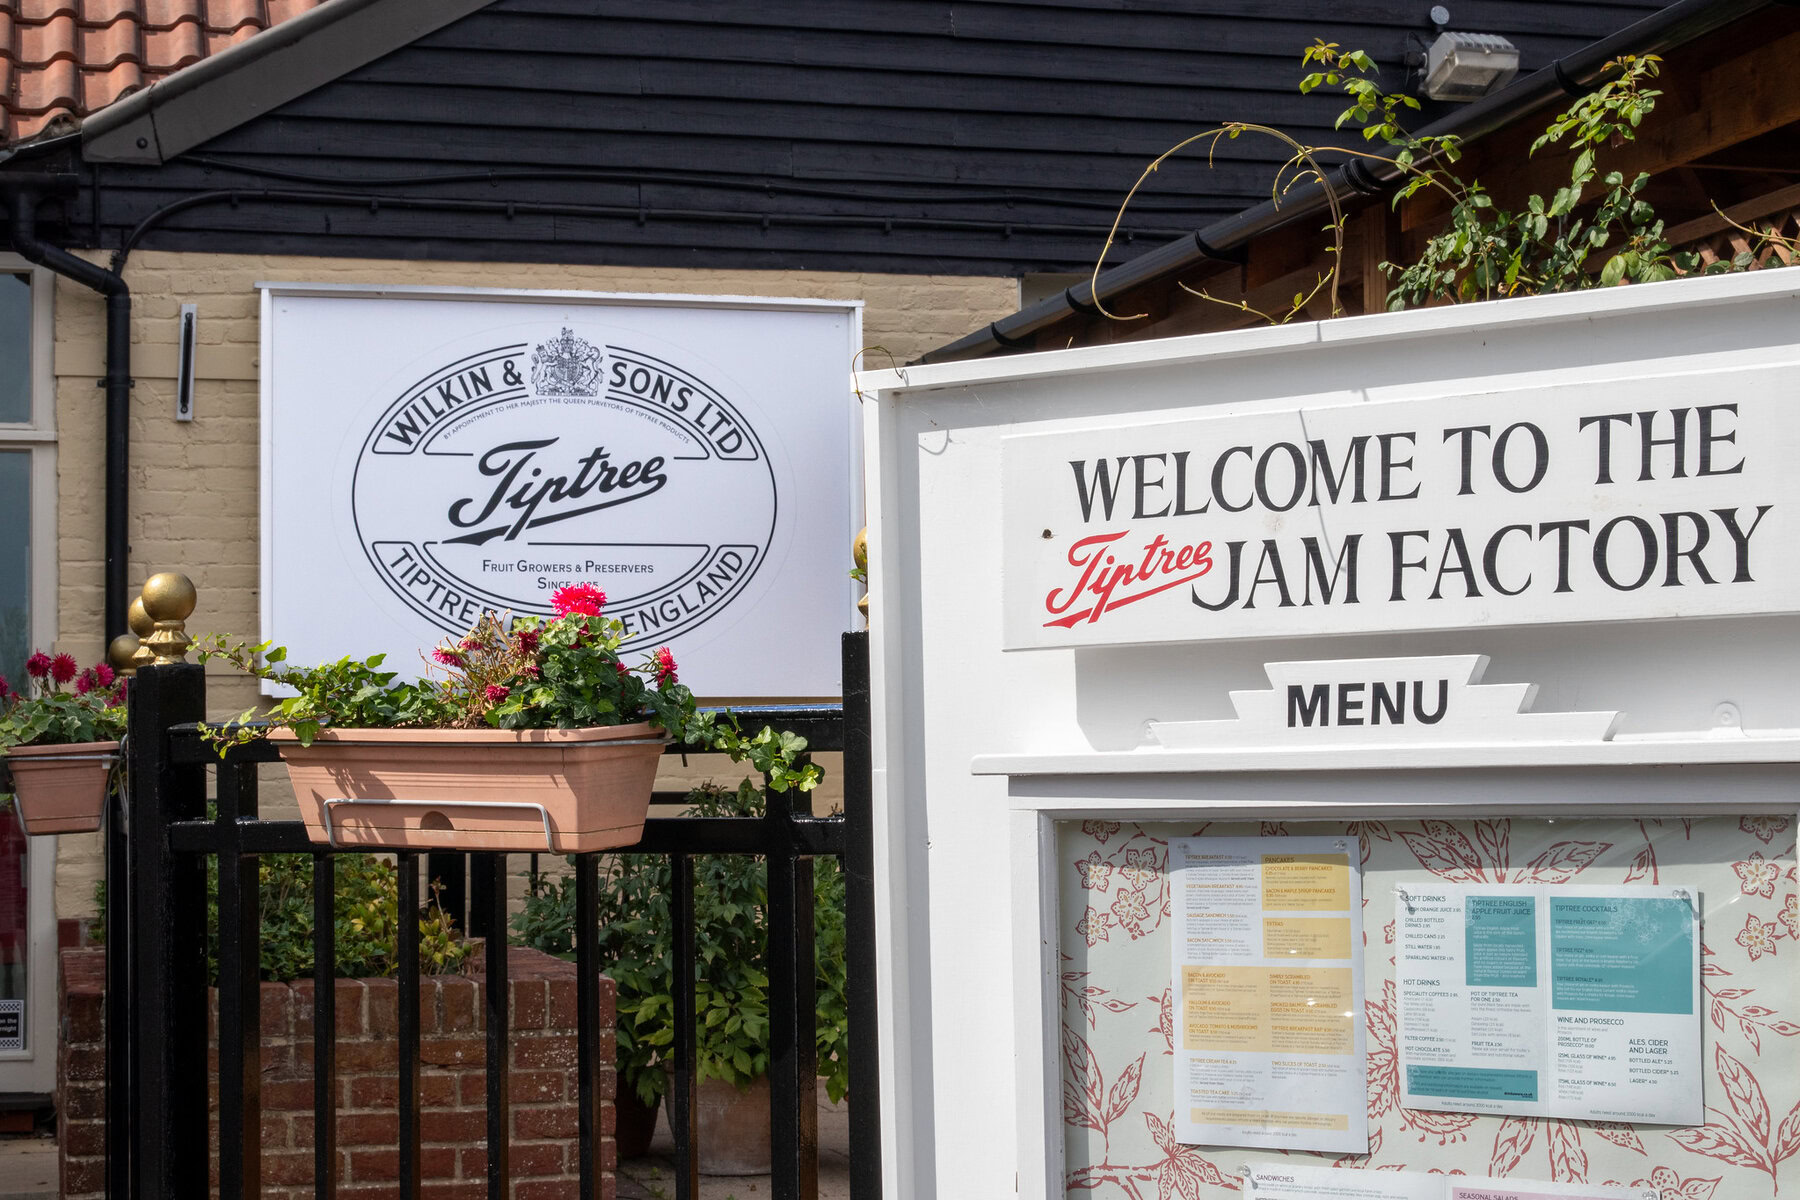 A sign for the Tiptree Jam Factory.